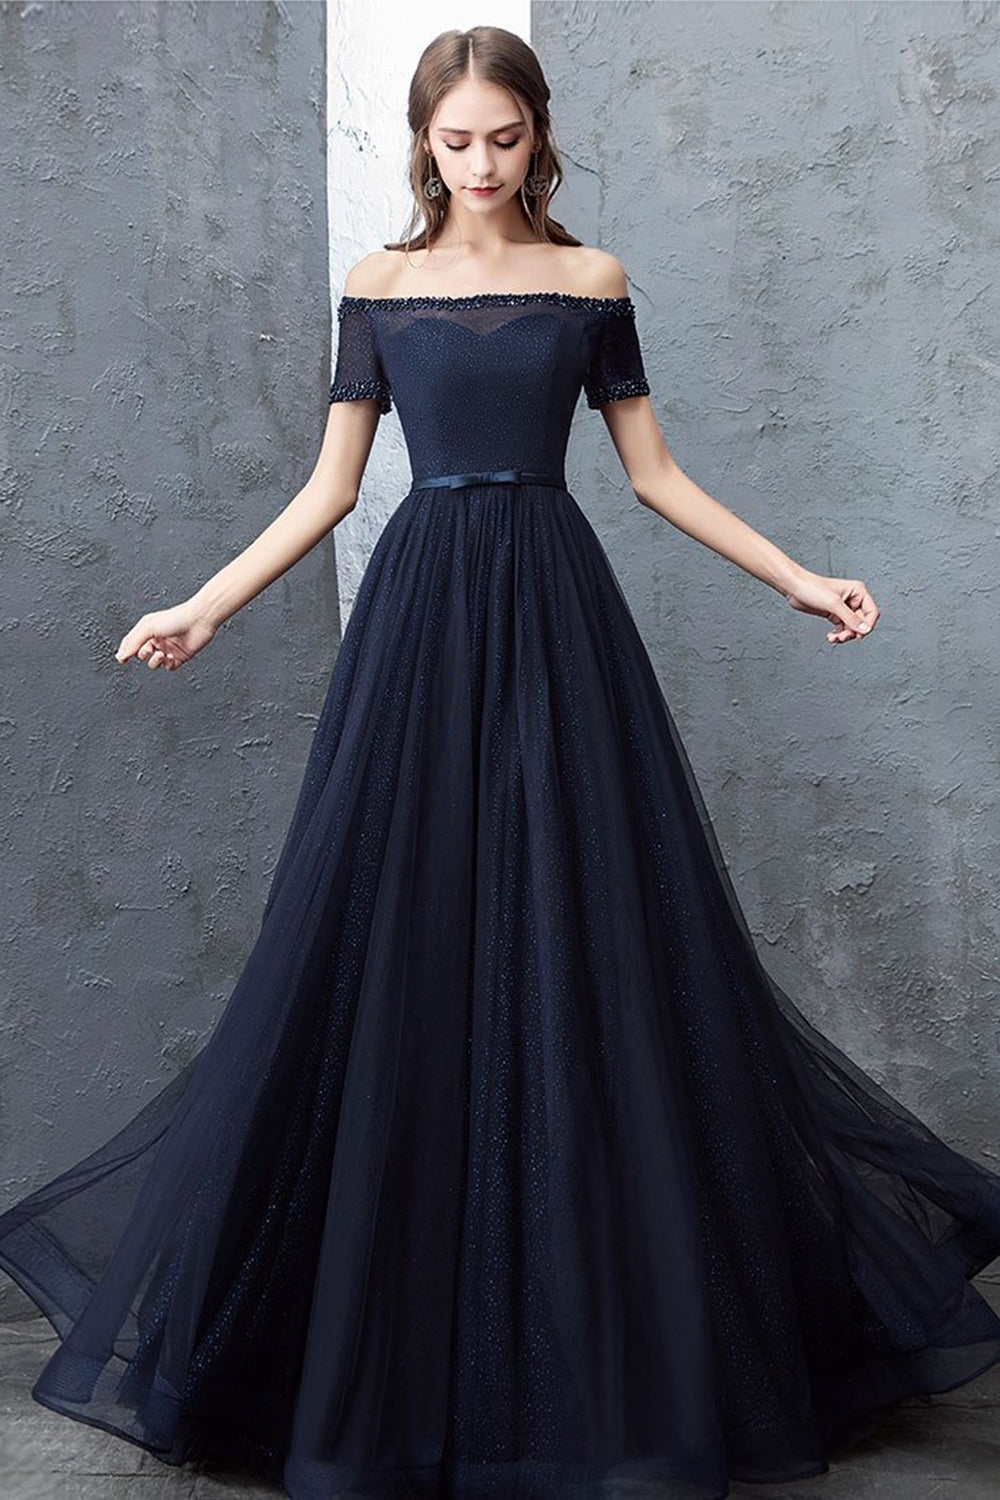 Shiny Navy blue off the shoulder Luxury Ball Gown wedding dress – AiSO  BRiDAL